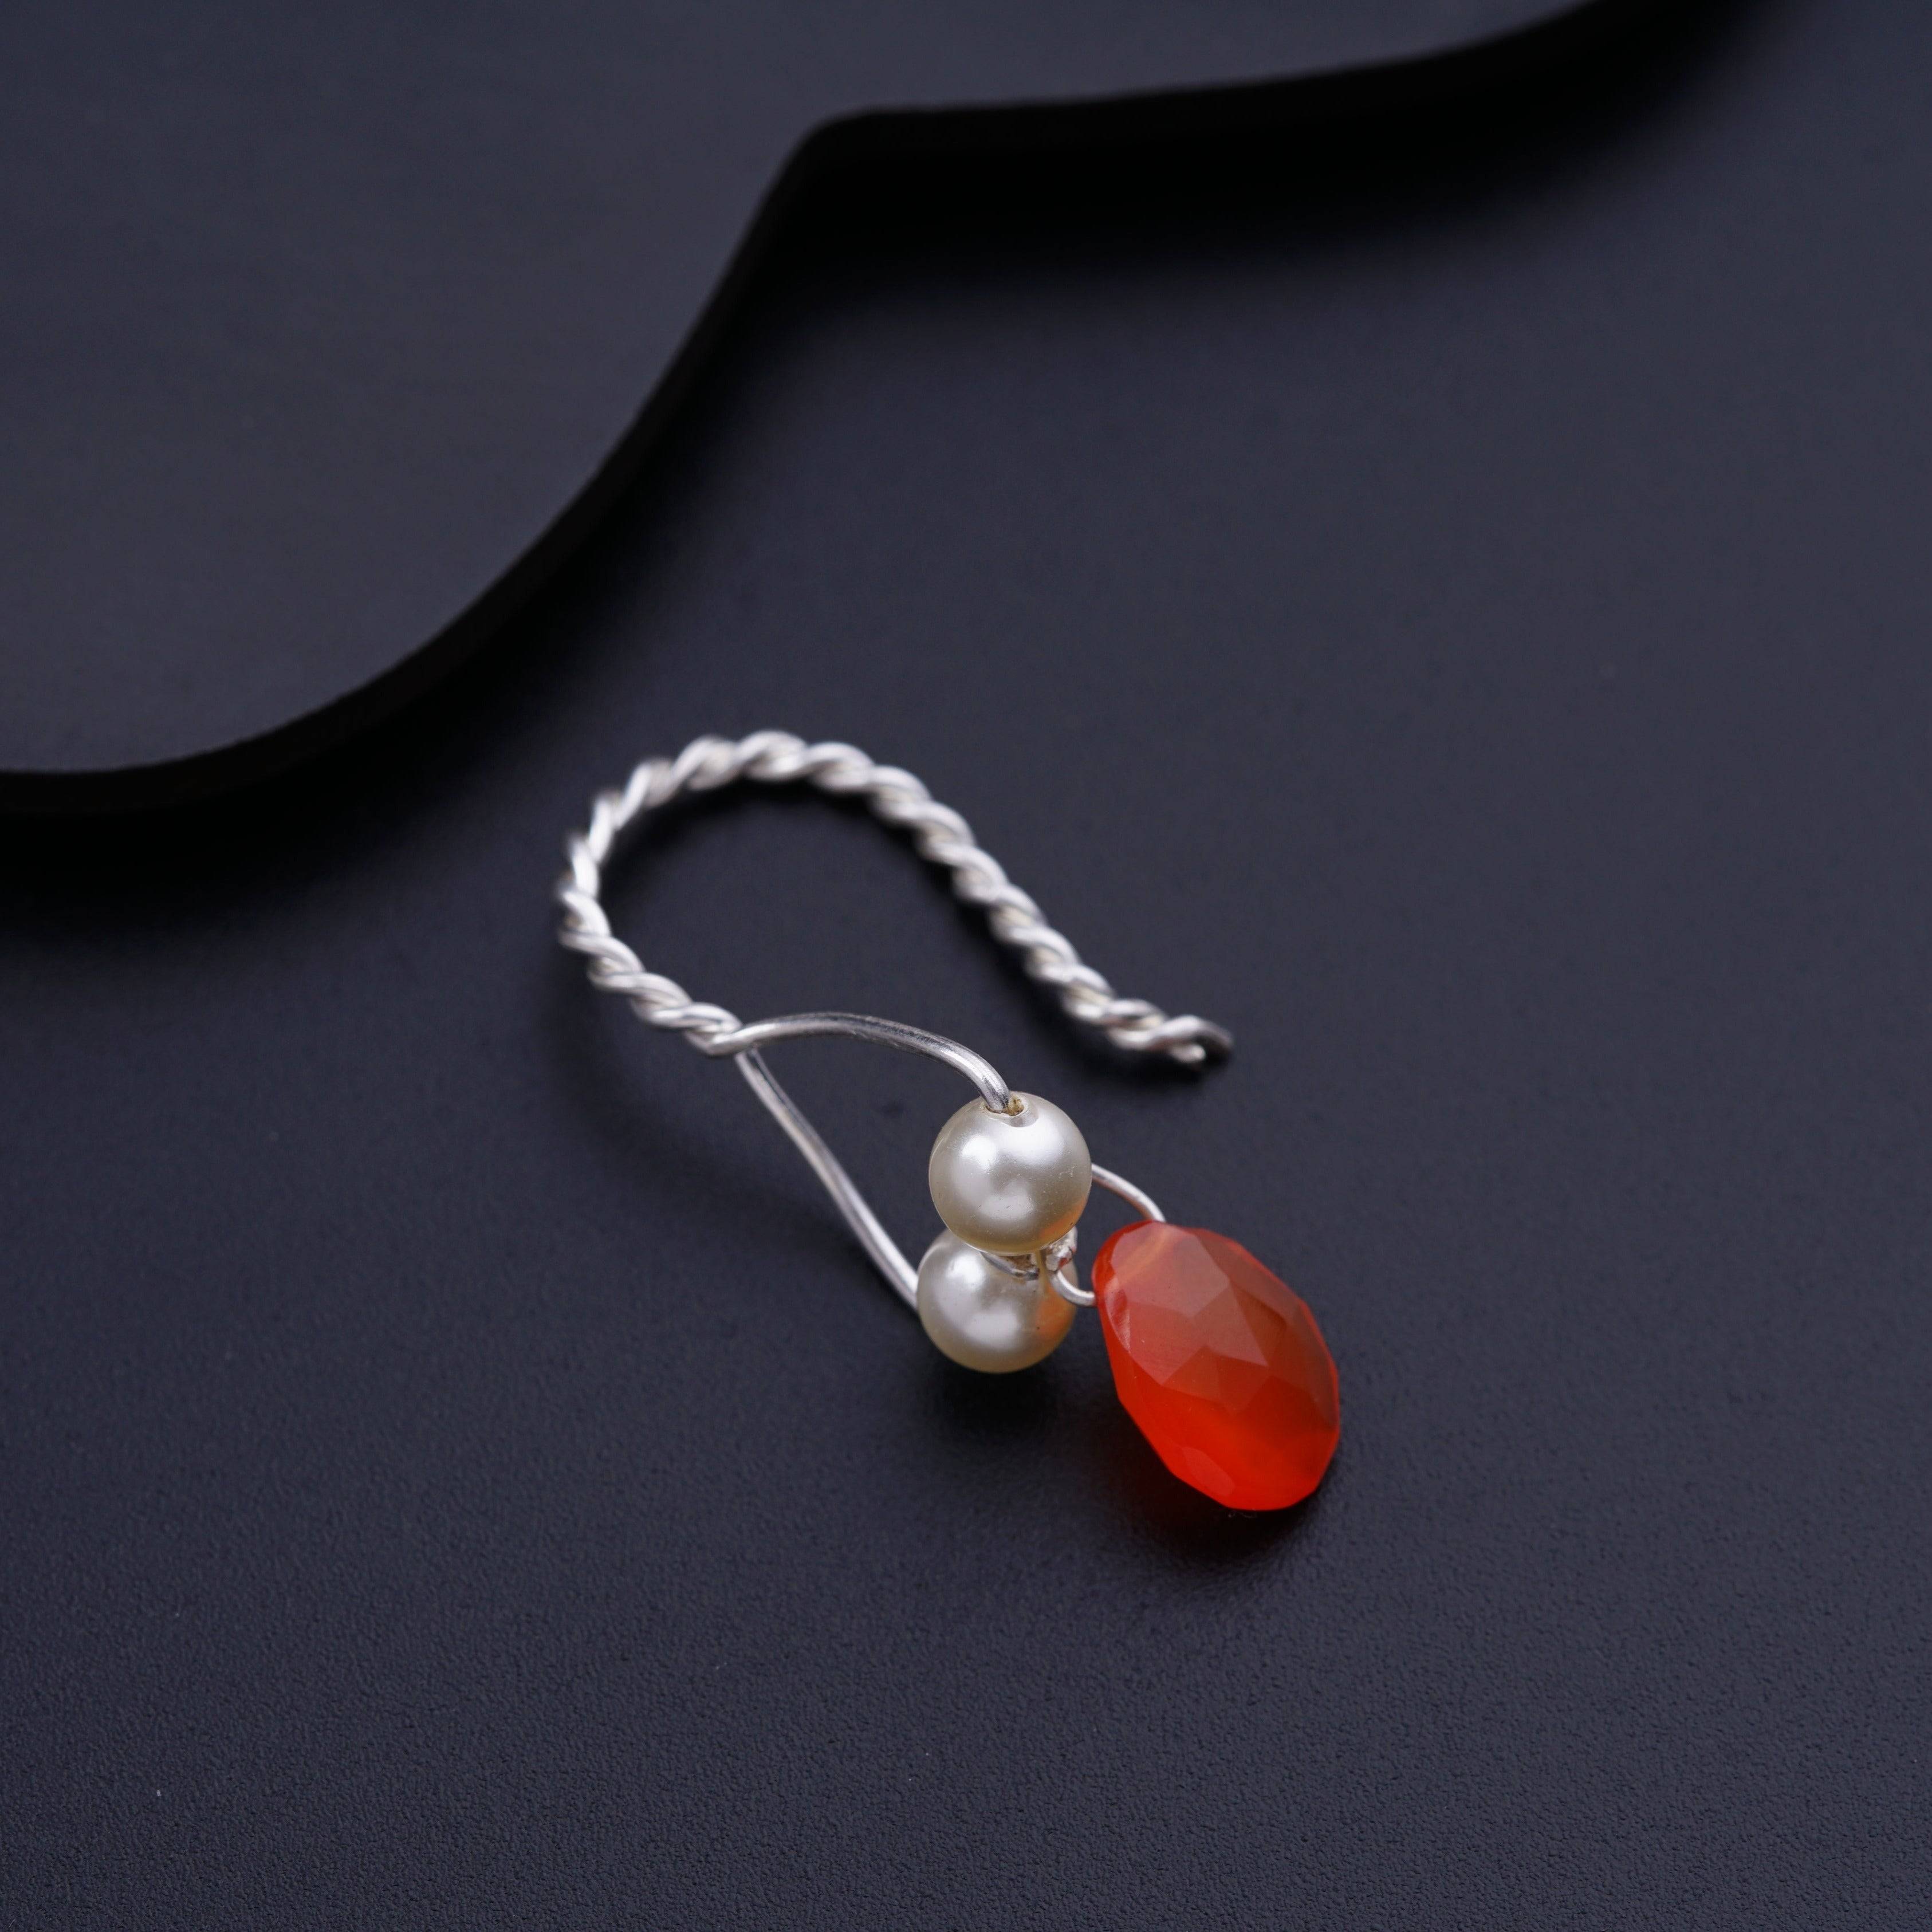 Bhikbali with Carnelian & Silver wire (Clip on)